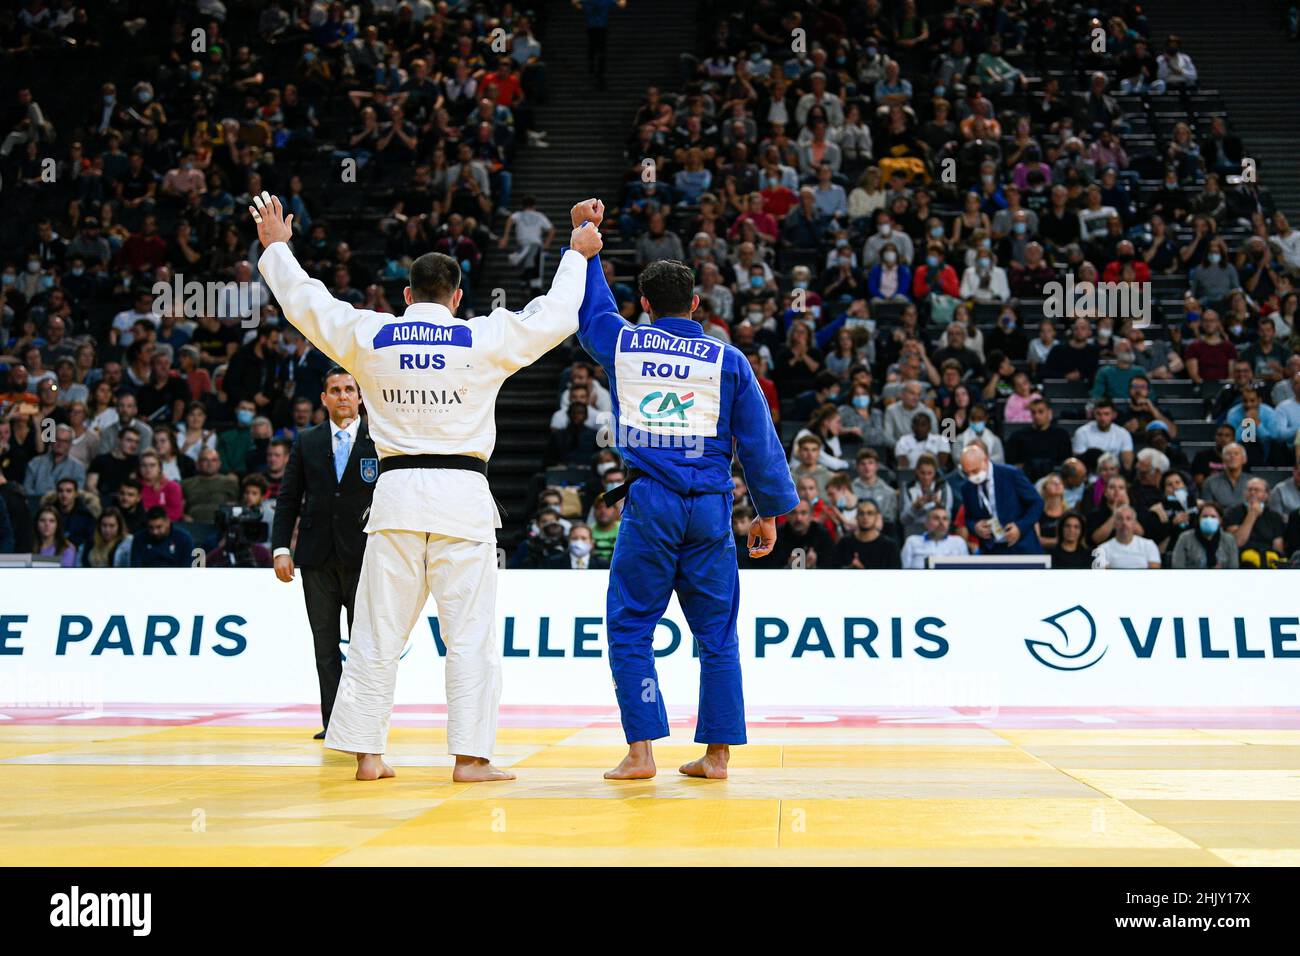 Men -100 kg, Arman ADAMIAN of Russia gold medal competes and Asley GONZALEZ of Romania silver meda salute the audience during the Paris Grand Slam 202 Stock Photo